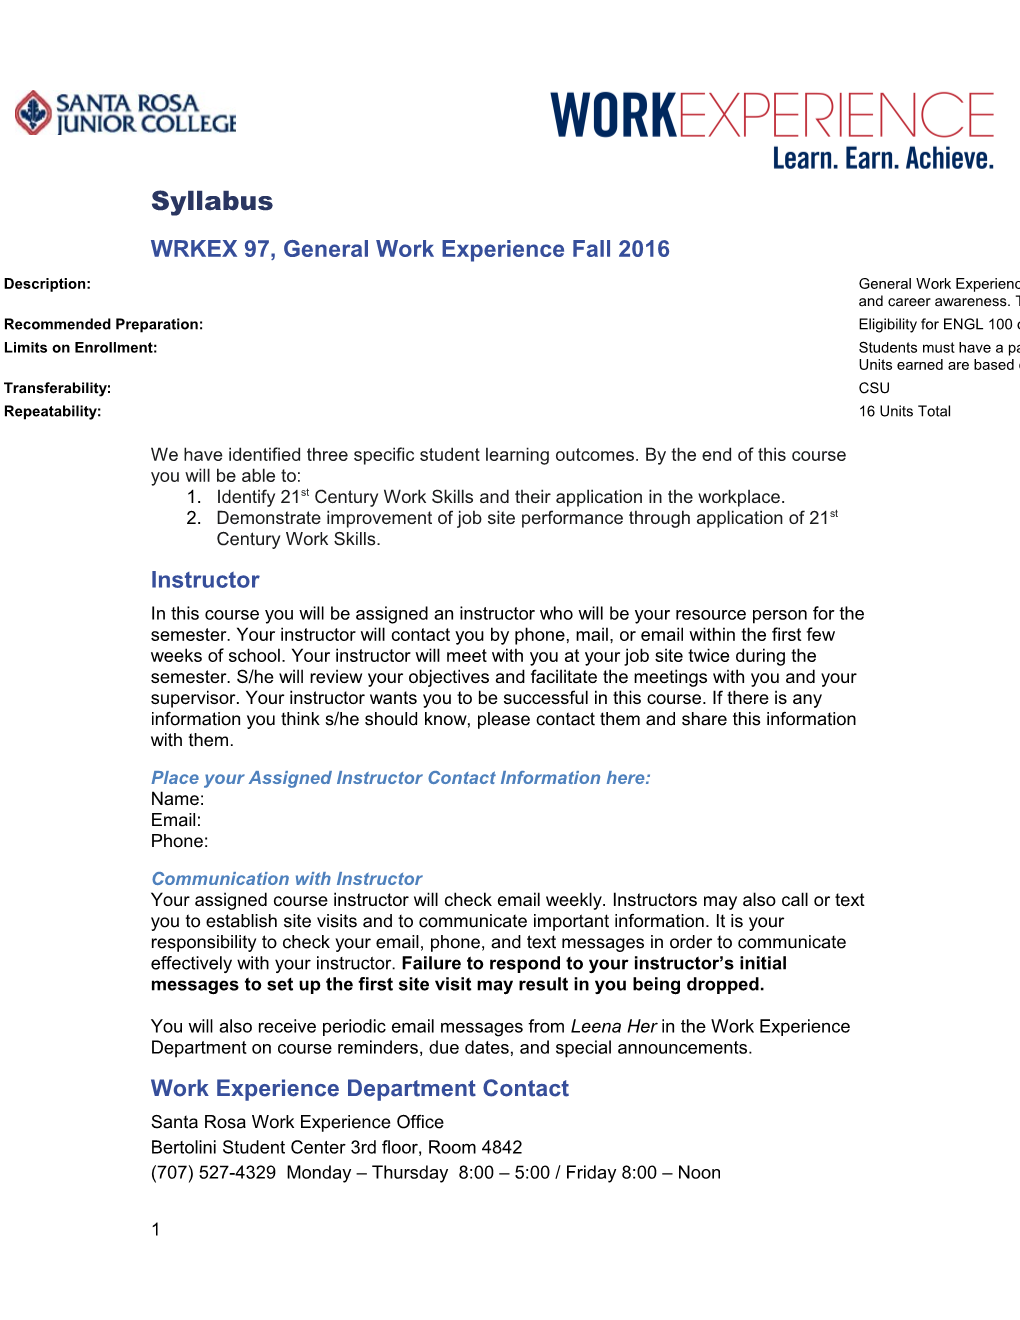 WRKEX 97, General Work Experience Fall 2016